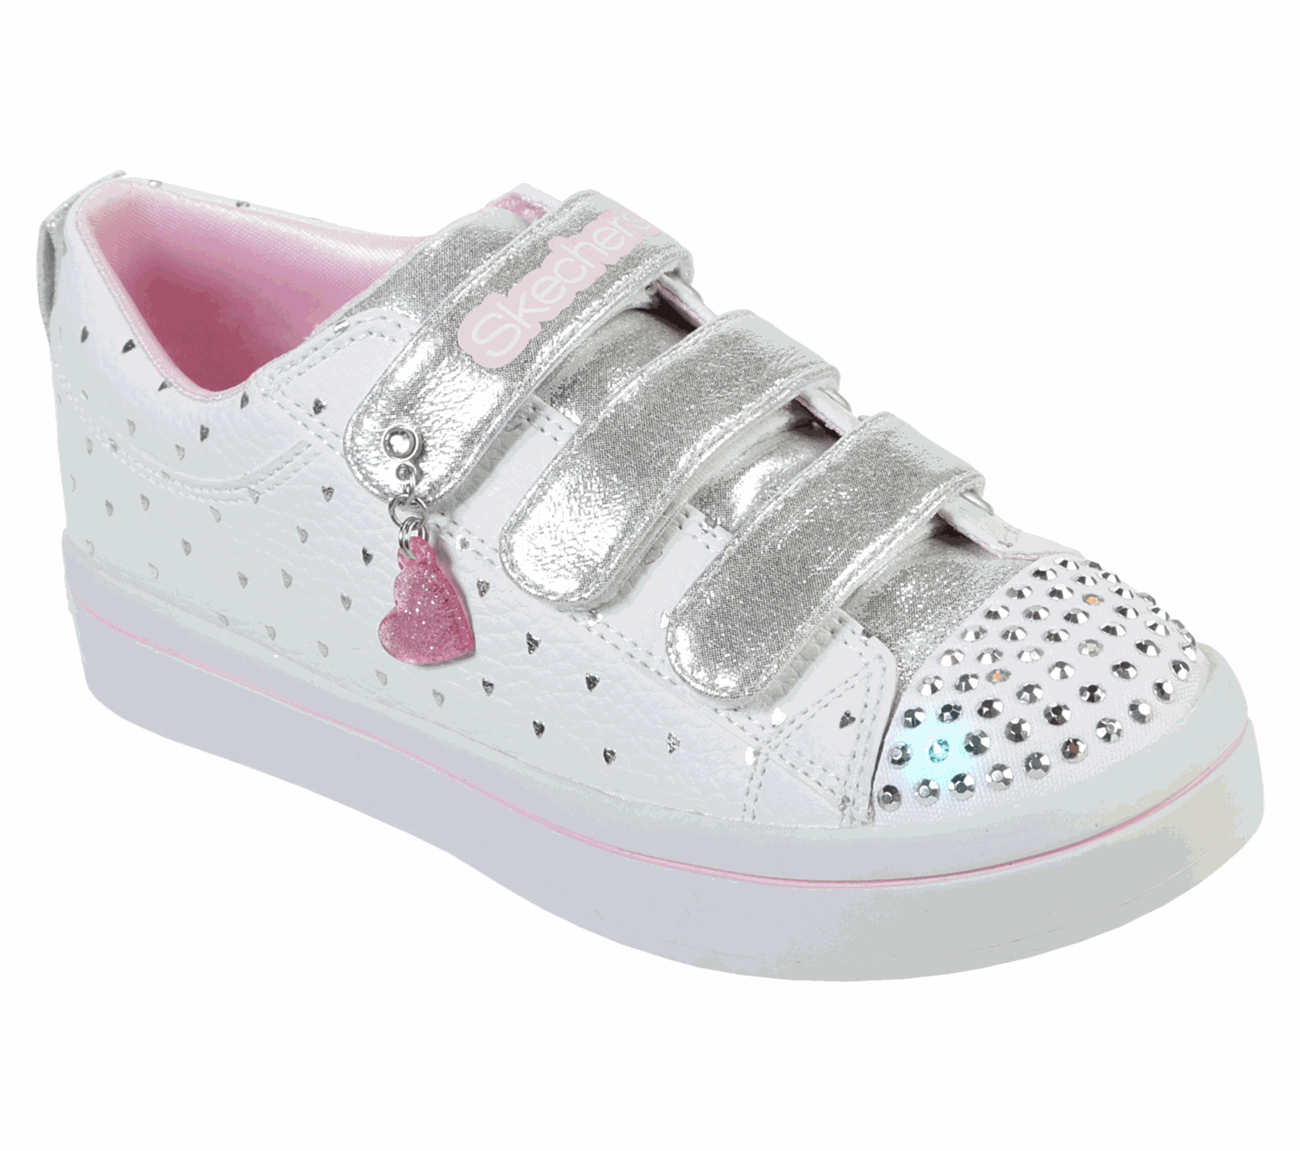 twinkle toes size 8 Online shopping has 